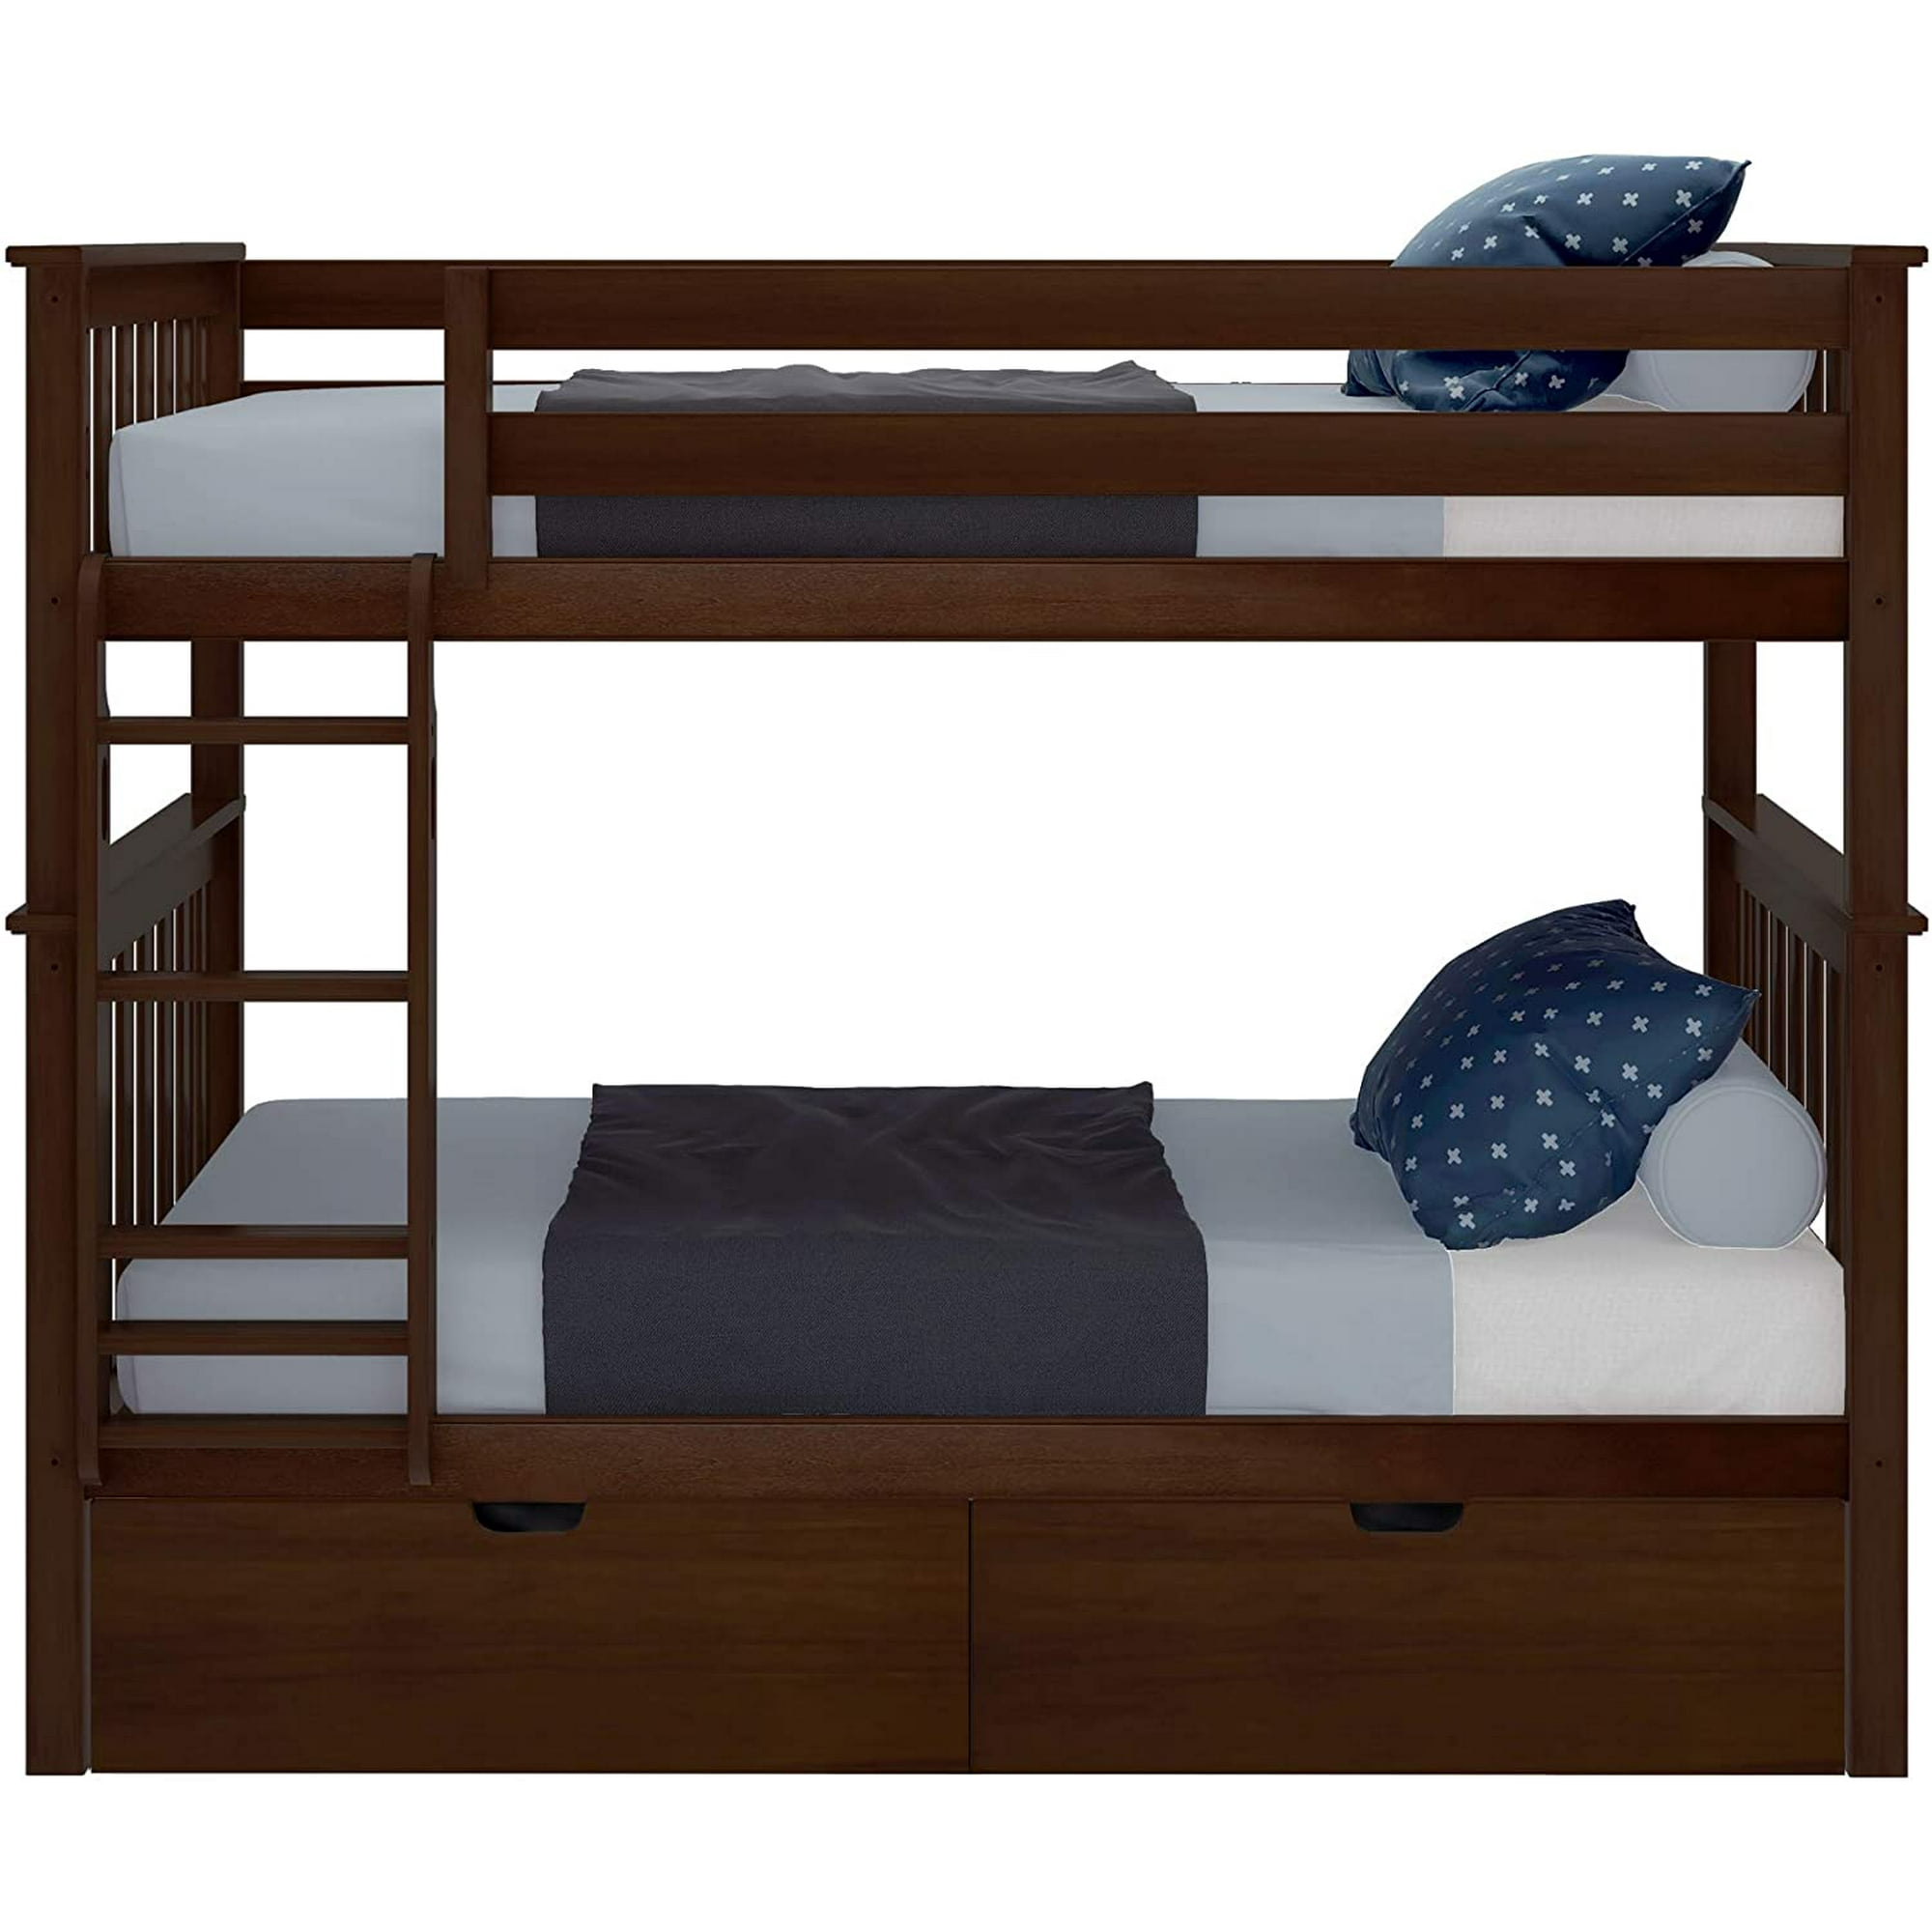 Bedsmart Solid Wood Full Size Bed With, Chadwick Twin Full Bunk Bed With Trundle